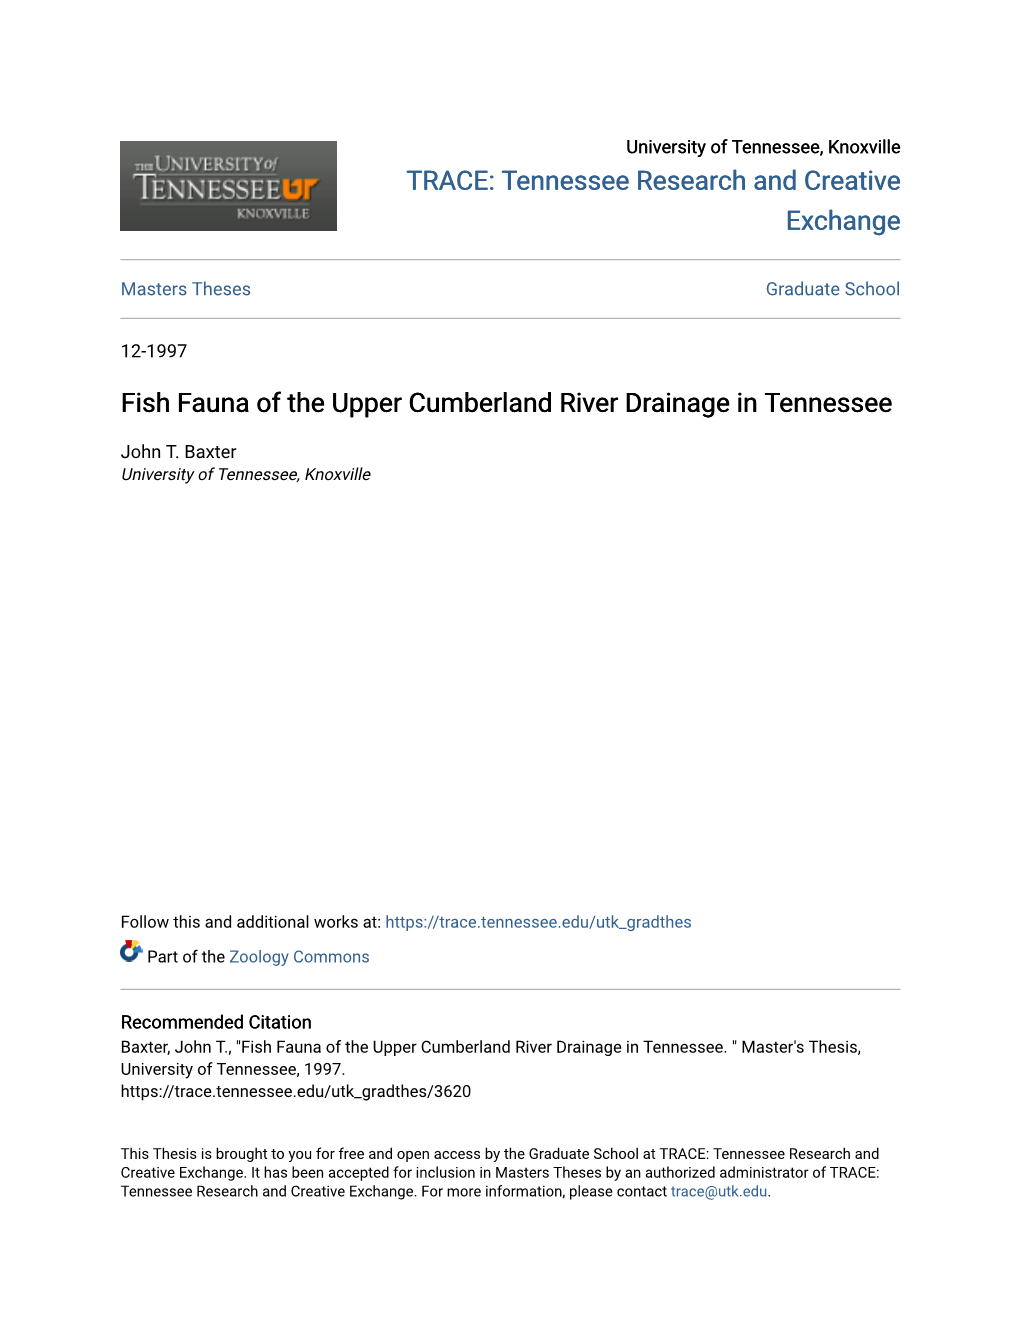 Fish Fauna of the Upper Cumberland River Drainage in Tennessee